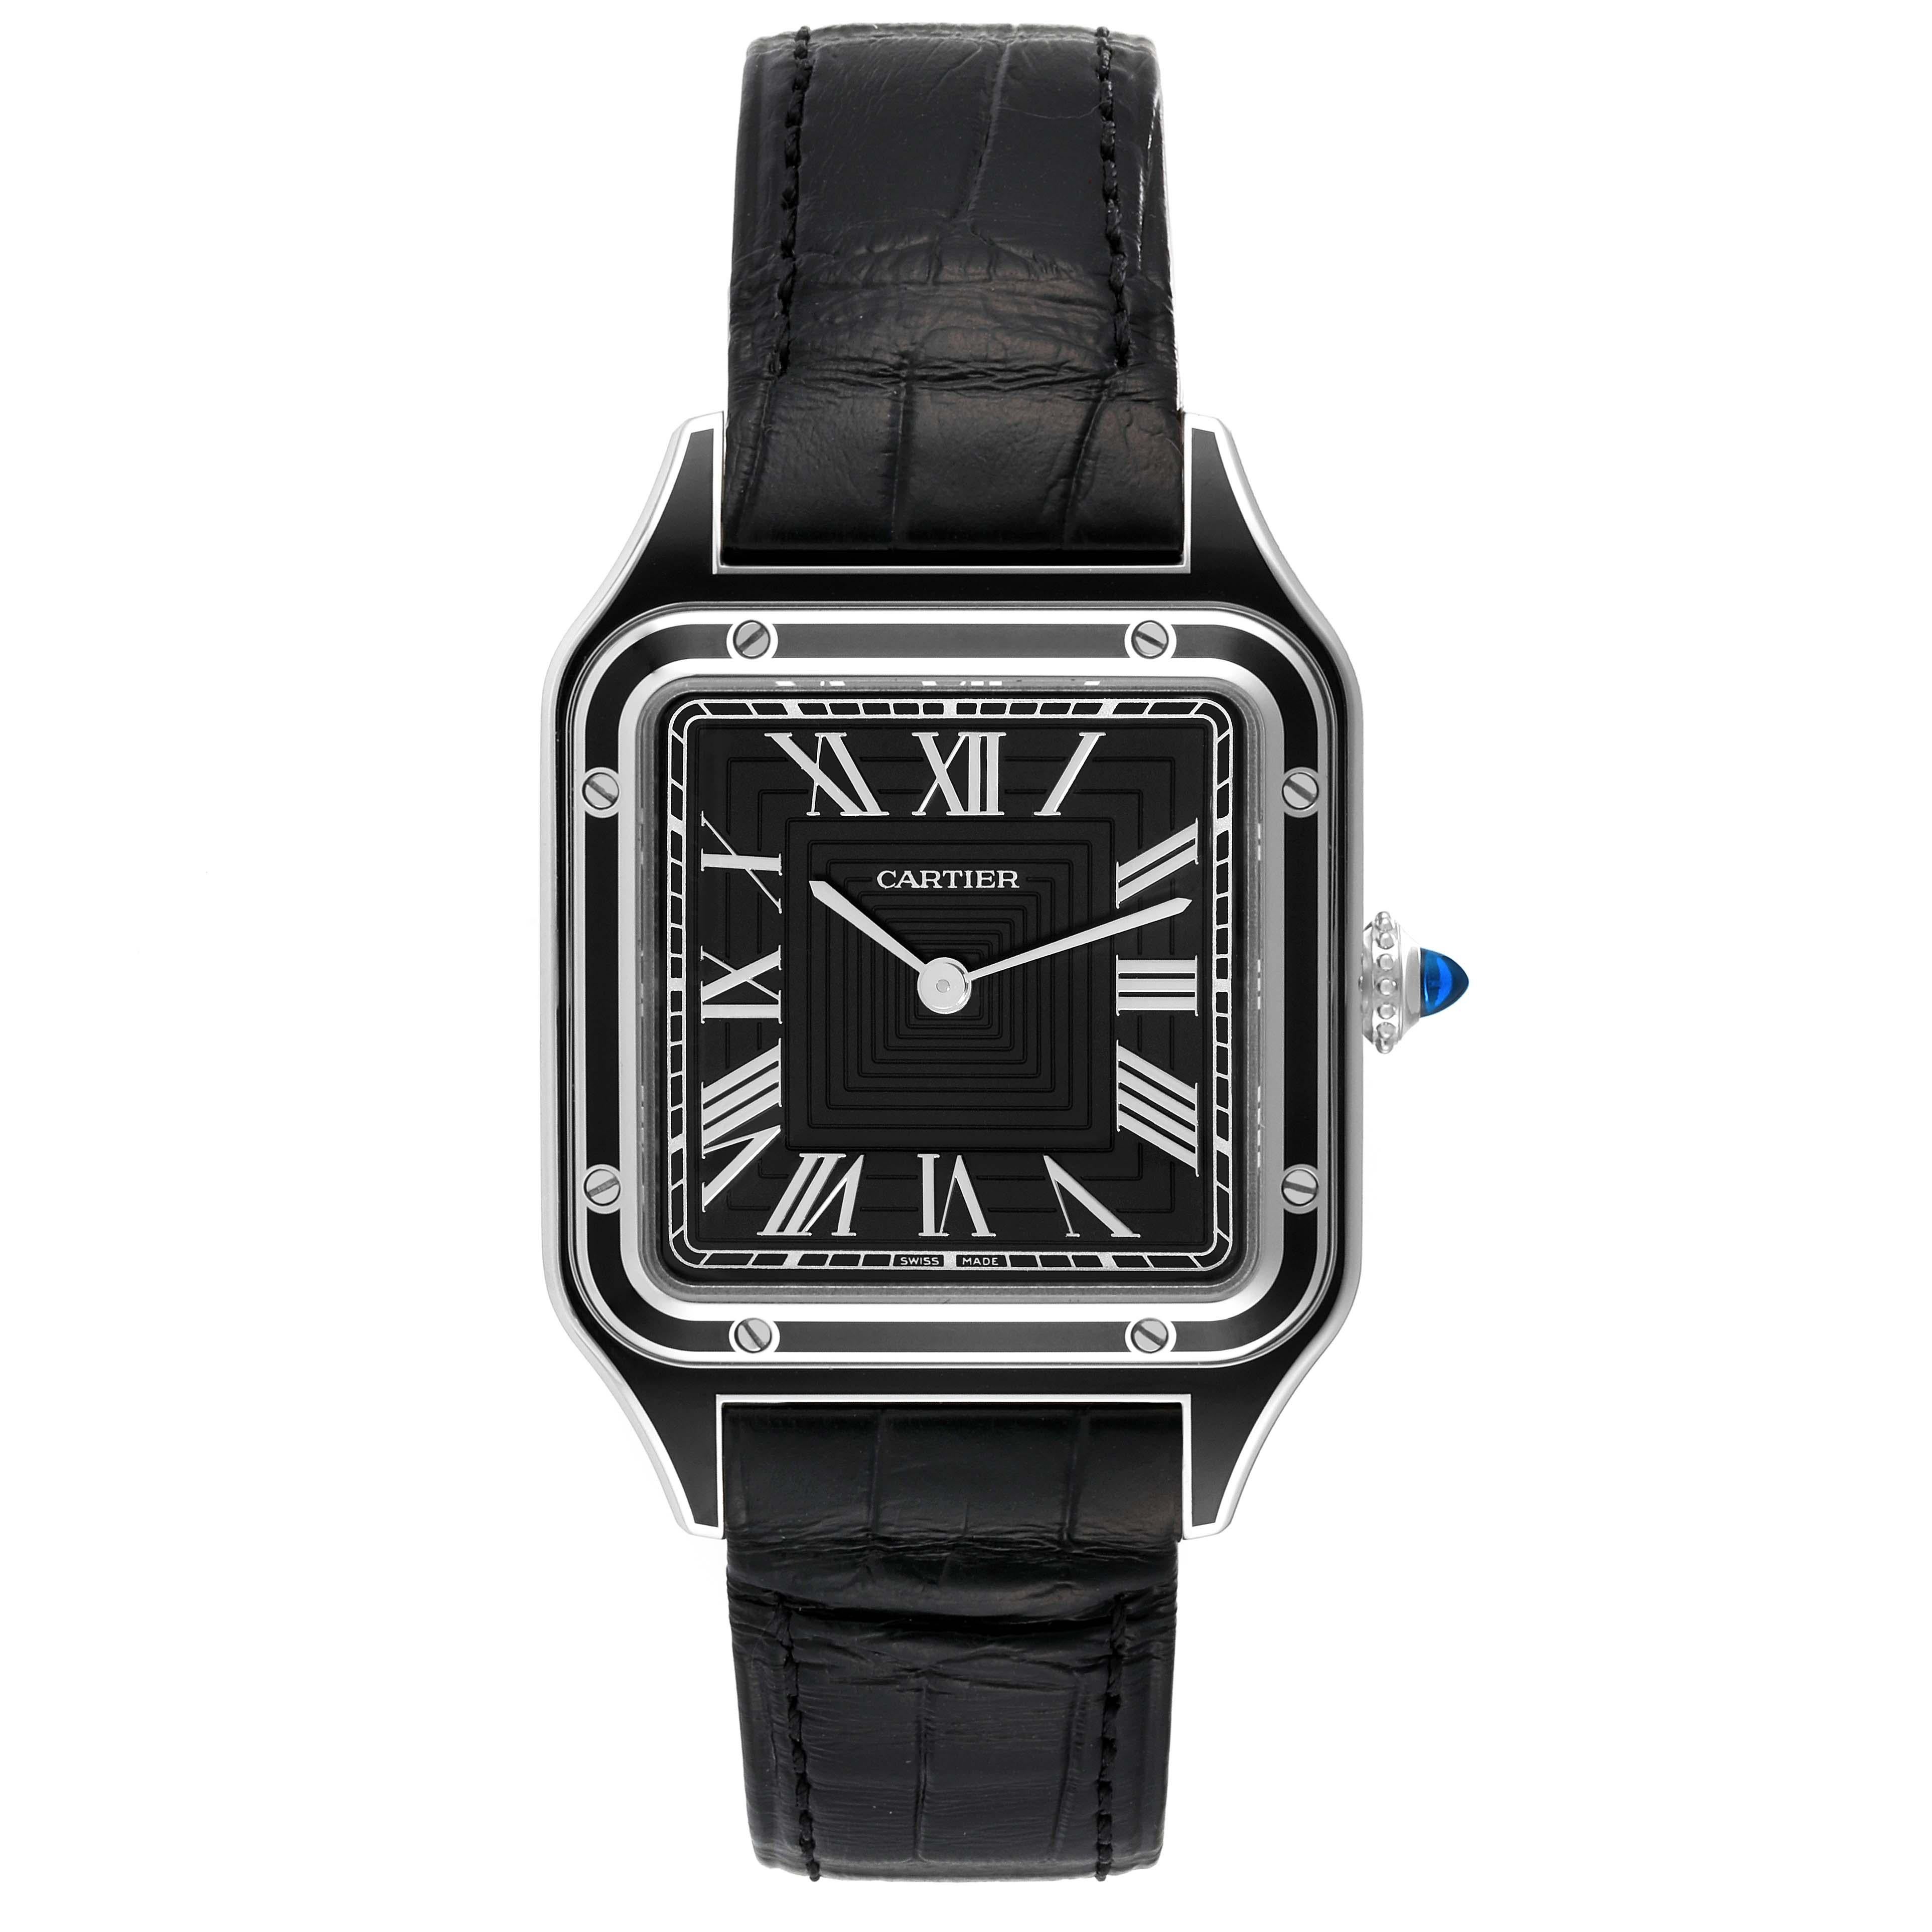 Cartier Santos Dumont Large Black Strap Steel Mens Watch WSSA0046 Unworn. Manual winding movement. Stainless steel case with black lacquer 43.5 mm x 31.4 mm. Case thickness 7.3 mm. Caseback engraved with handwritten signature of Alberto